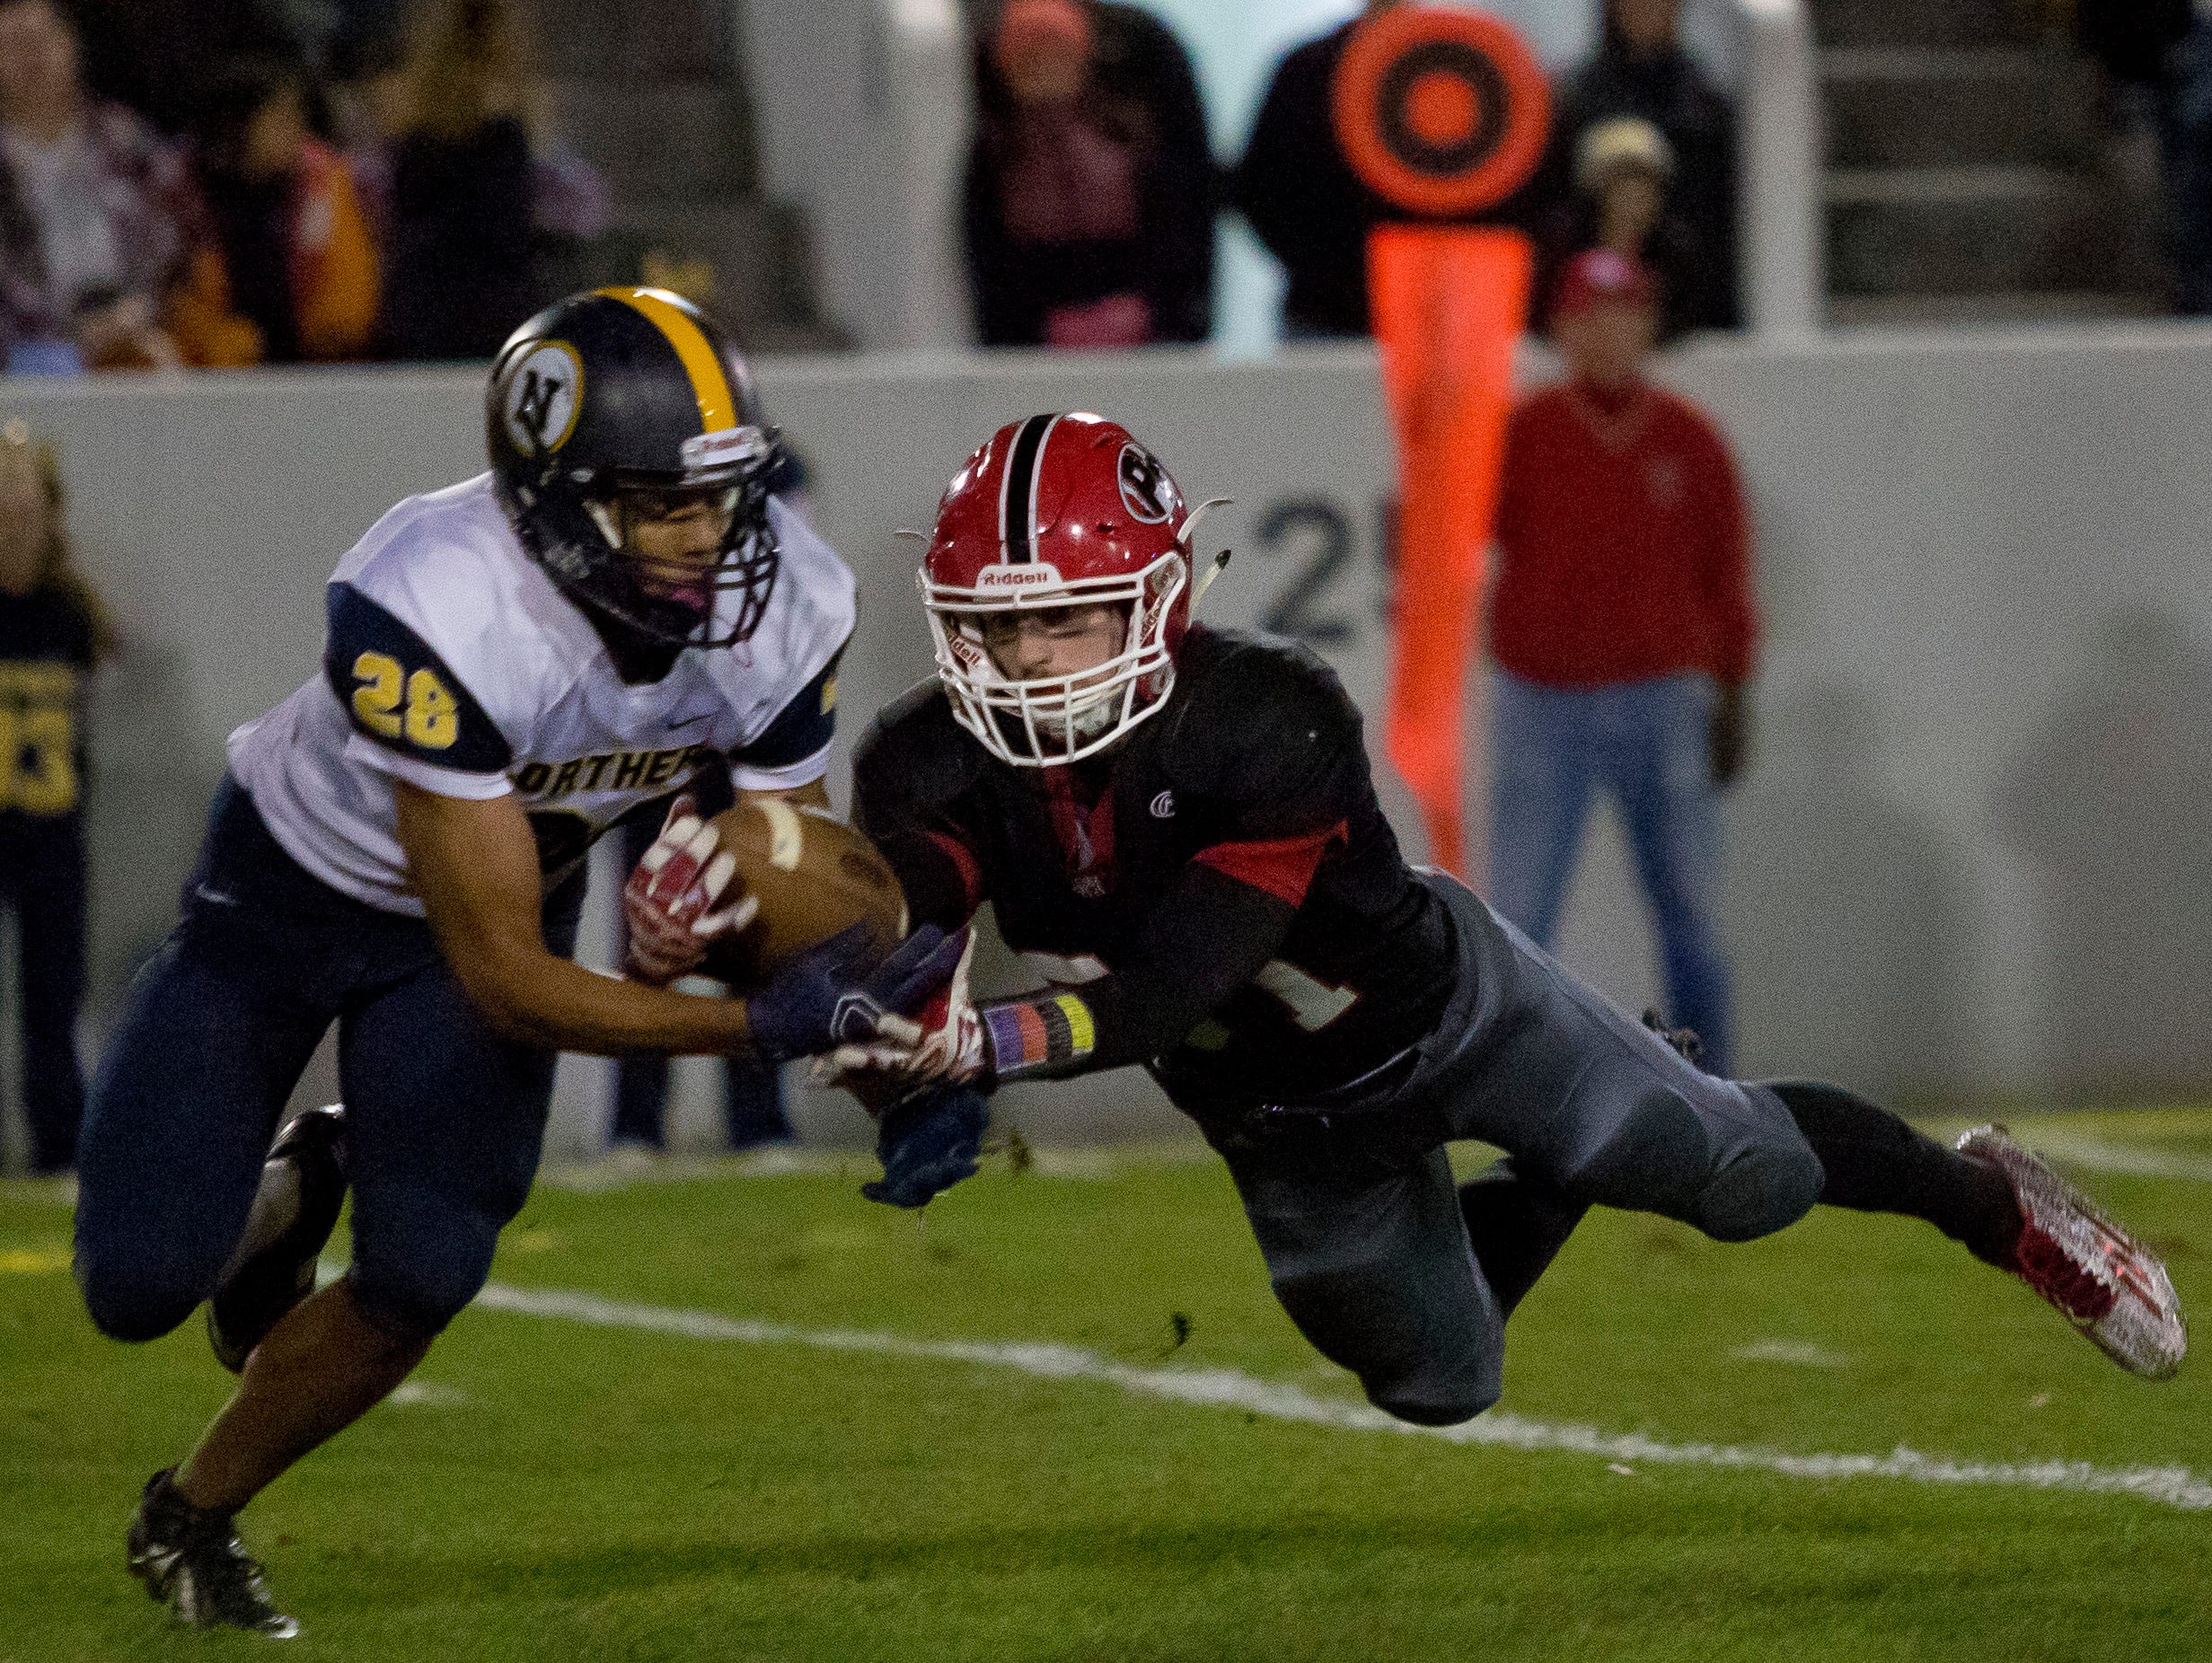 Port Huron senior Jake Lee leaps for a pass but is broken up by Port Huron Northern junior Michael Burrell during the Crosstown Showdown Friday, October 23, 2015 at Memorial Stadium in Port Huron.